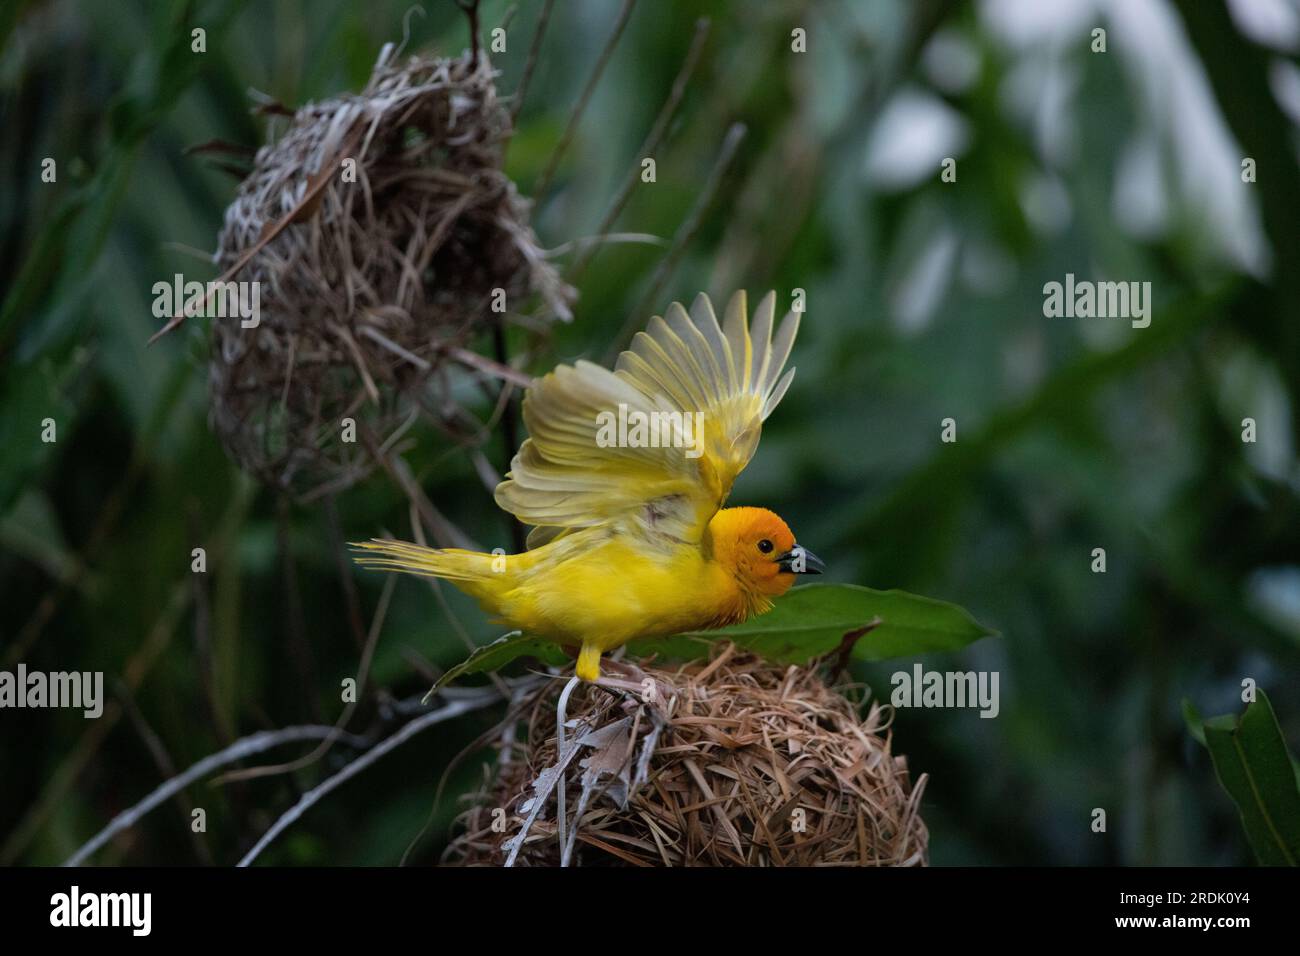 The weaver birds (Ploceidae) from Africa, also known as Widah finches building a nest. A braided masterpiece of a bird. Spread Wings Frozen Stock Photo